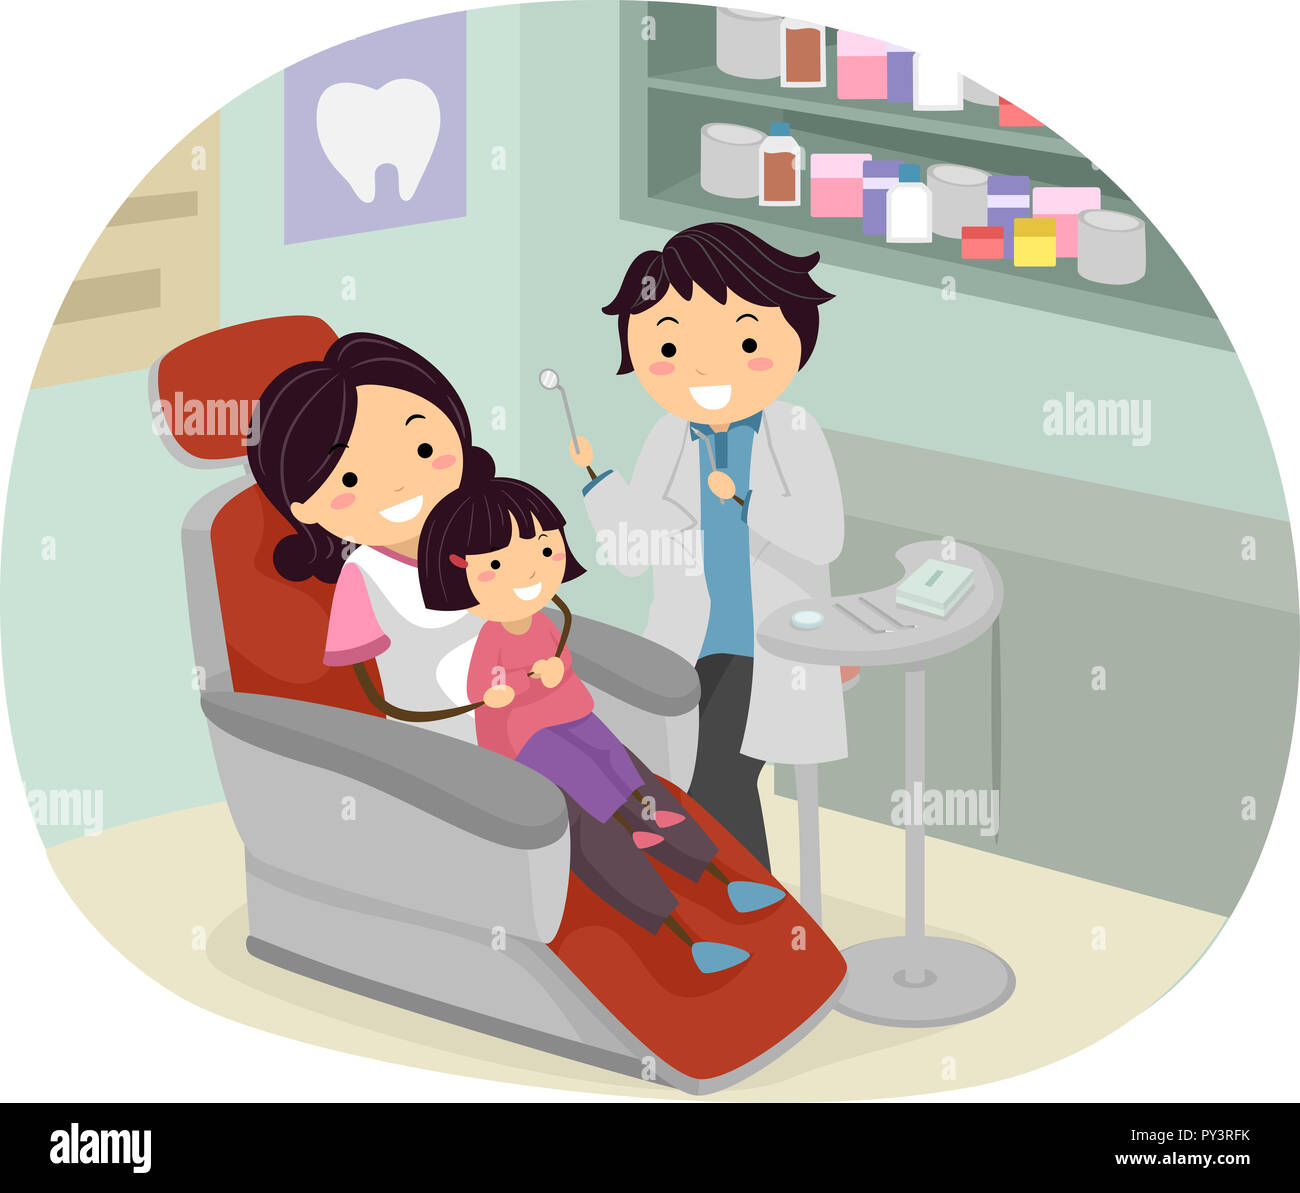 Illustration of Stickman Kid Sitting On Her Moms Lap Sitting On a Dentist Chair Stock Photo